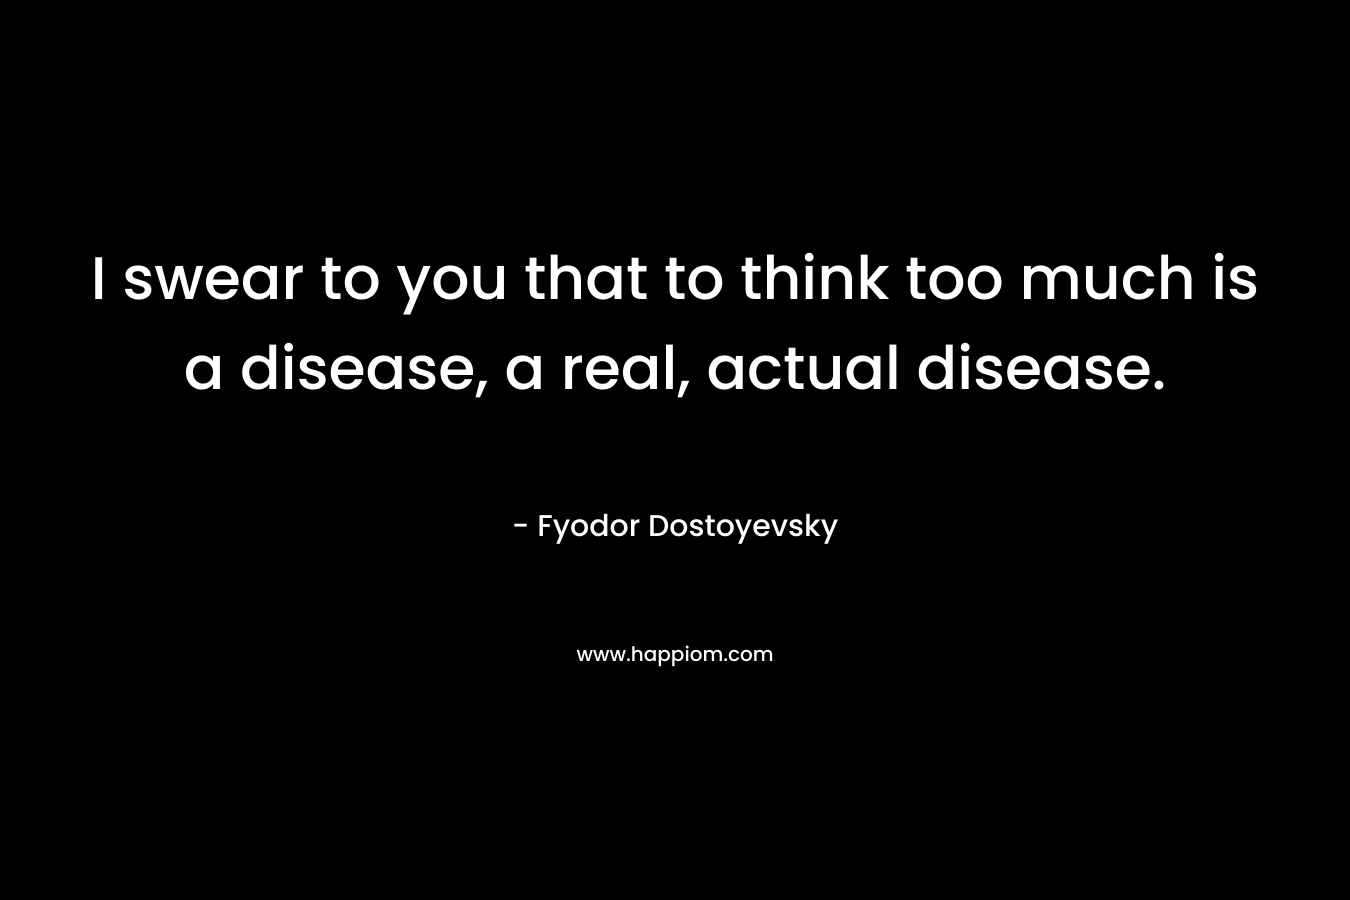 I swear to you that to think too much is a disease, a real, actual disease. – Fyodor Dostoyevsky